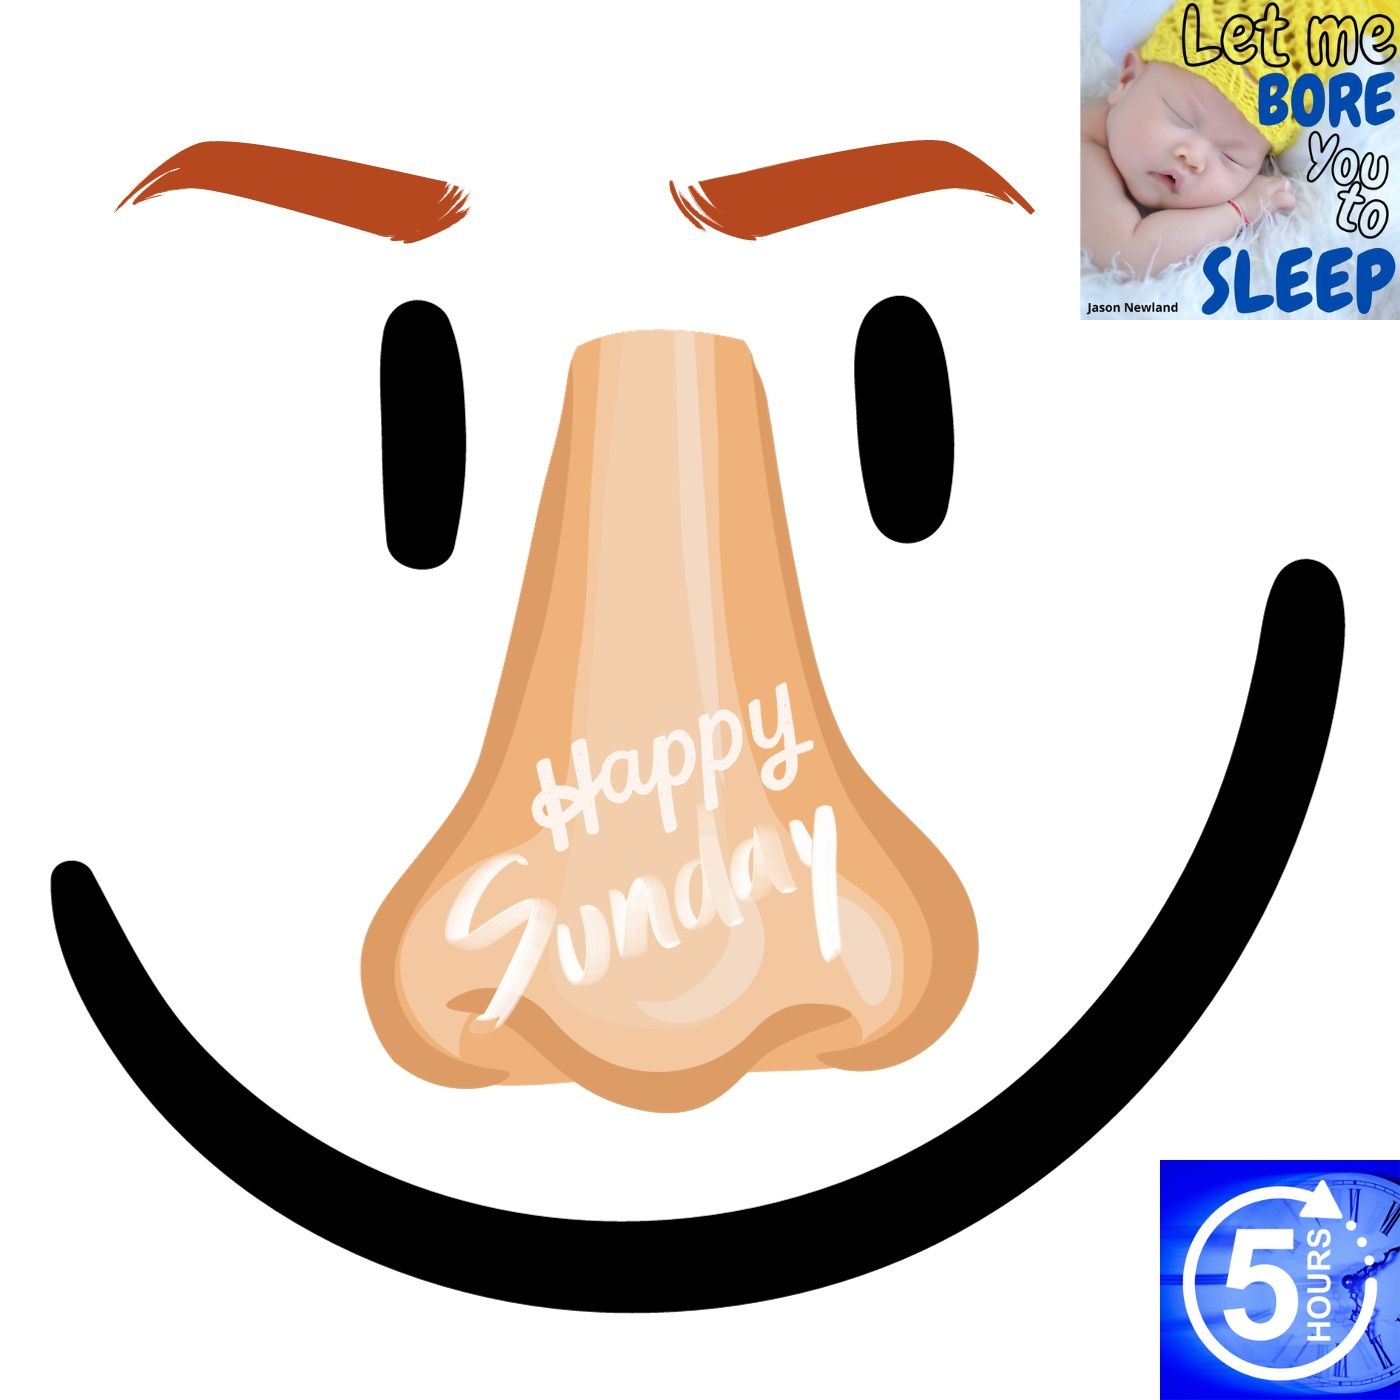 (5 hours) #1049 - Happy Sunday - Let me bore you to sleep